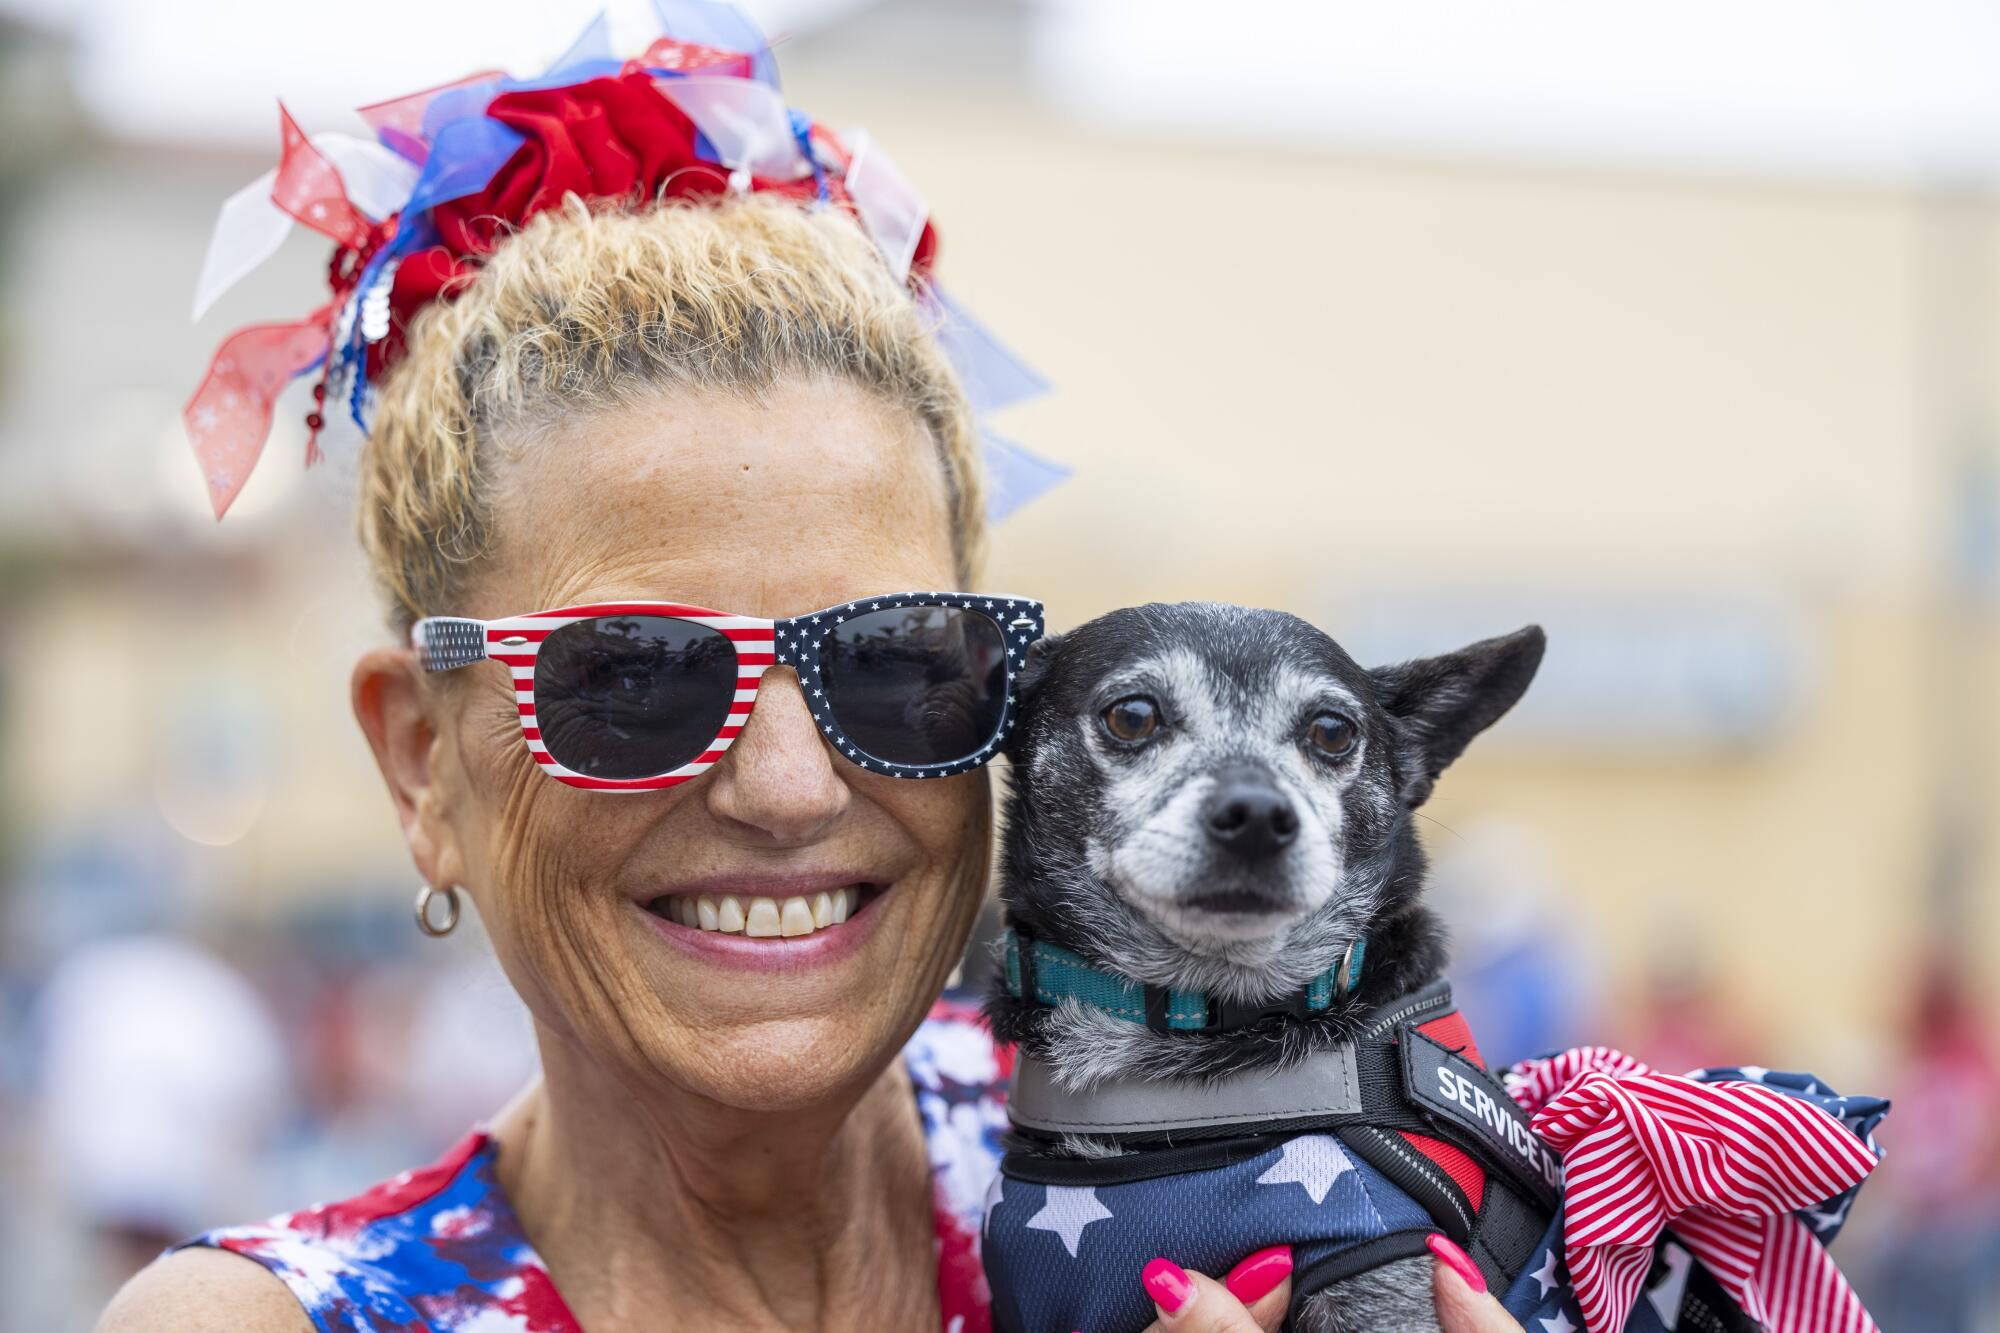 Donna Morici, with her dog, at the Huntington Beach Annual Independence Day Parade.